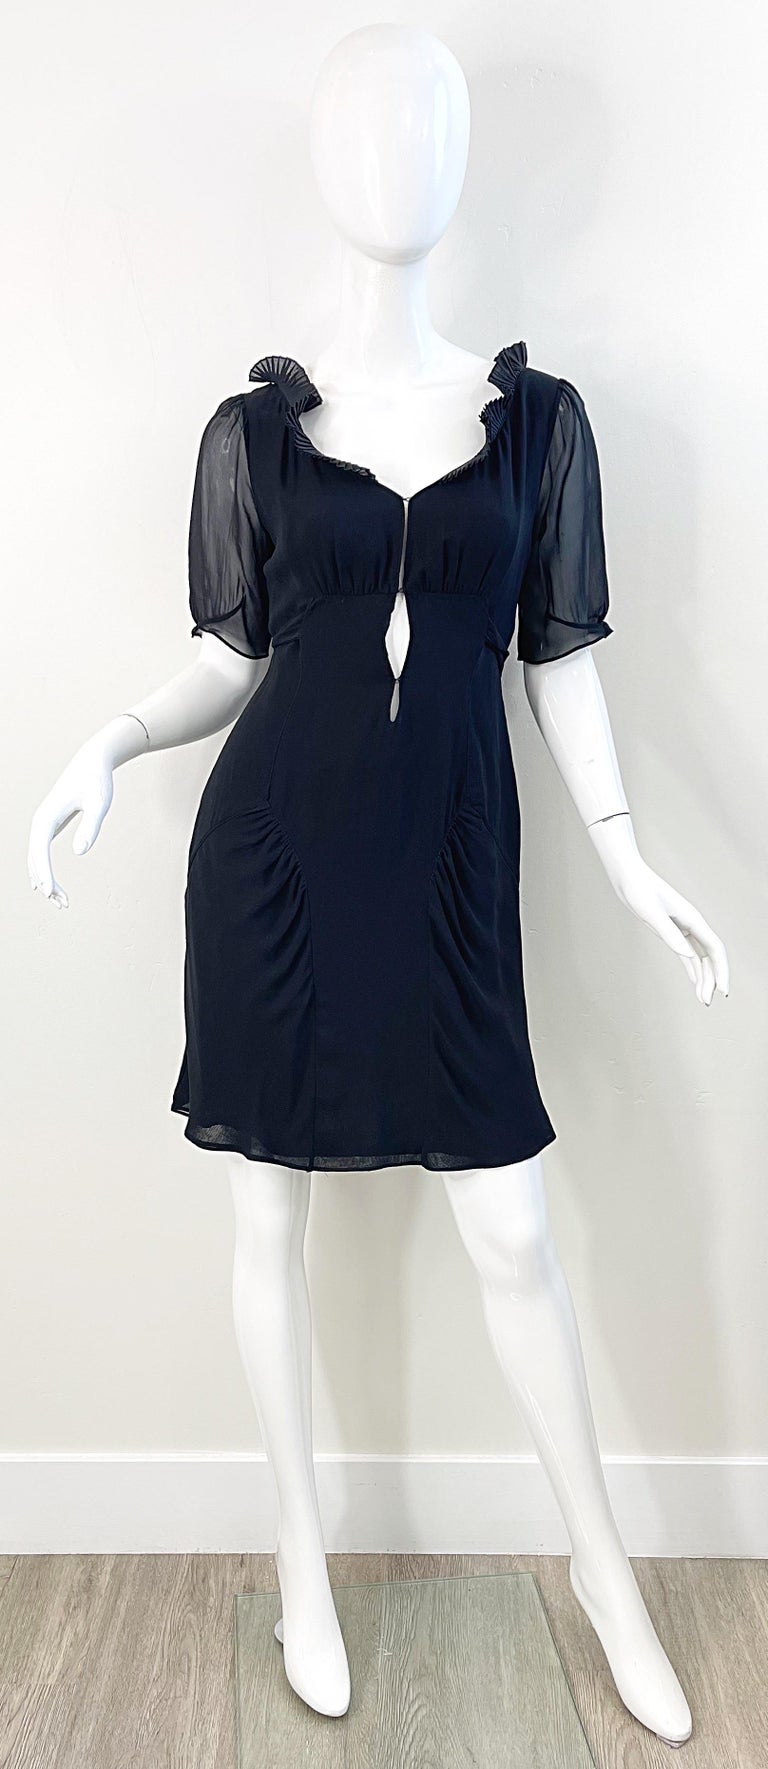 Late 90s COSTUME NATIONAL black silk chiffon short sleeve cut-out babydoll style dress ! Features multiple layers of soft silk chiffon. Ties in the back. Two hook-and-eye closures at bust. Ruffles around the neck. The perfect timeless little black